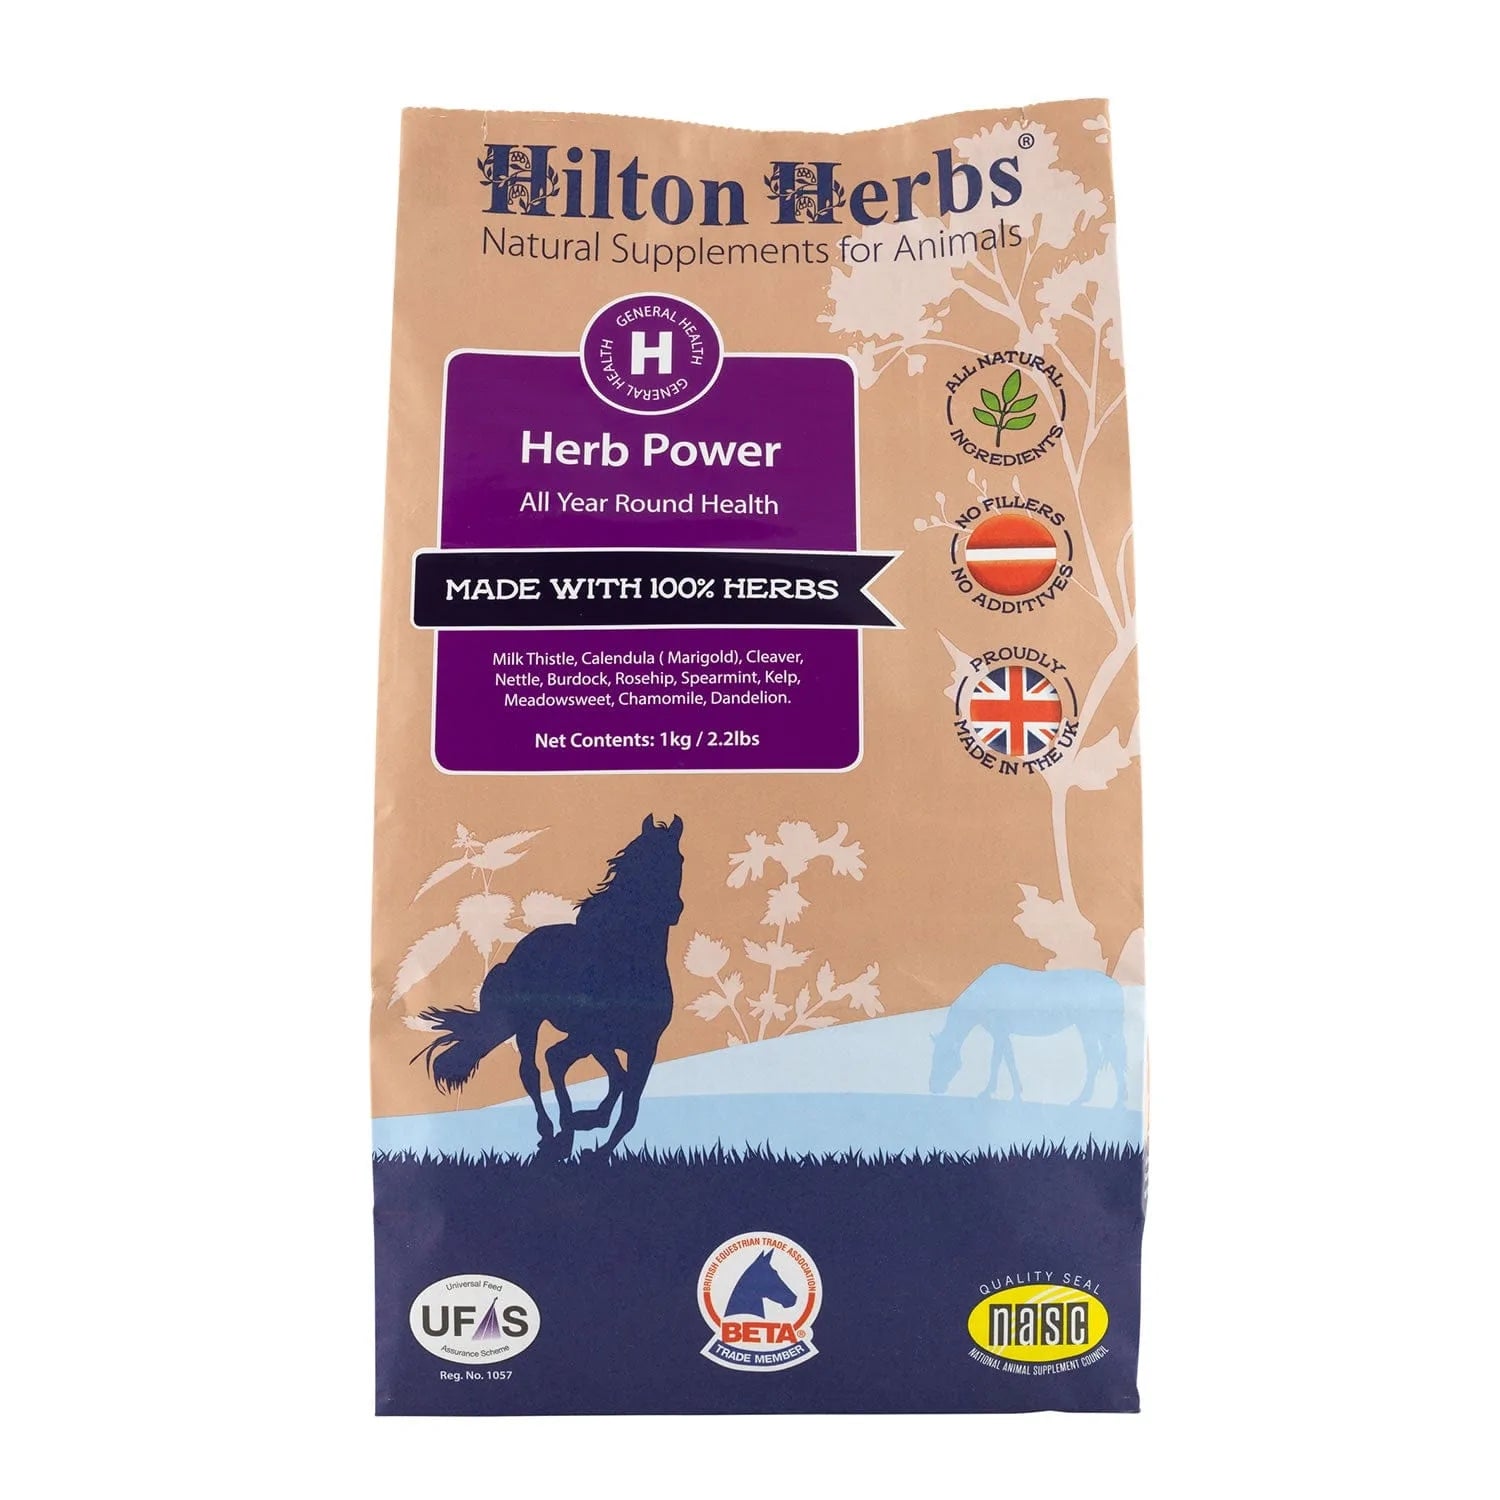 Hilton Herbs Herb Power - Just Horse Riders